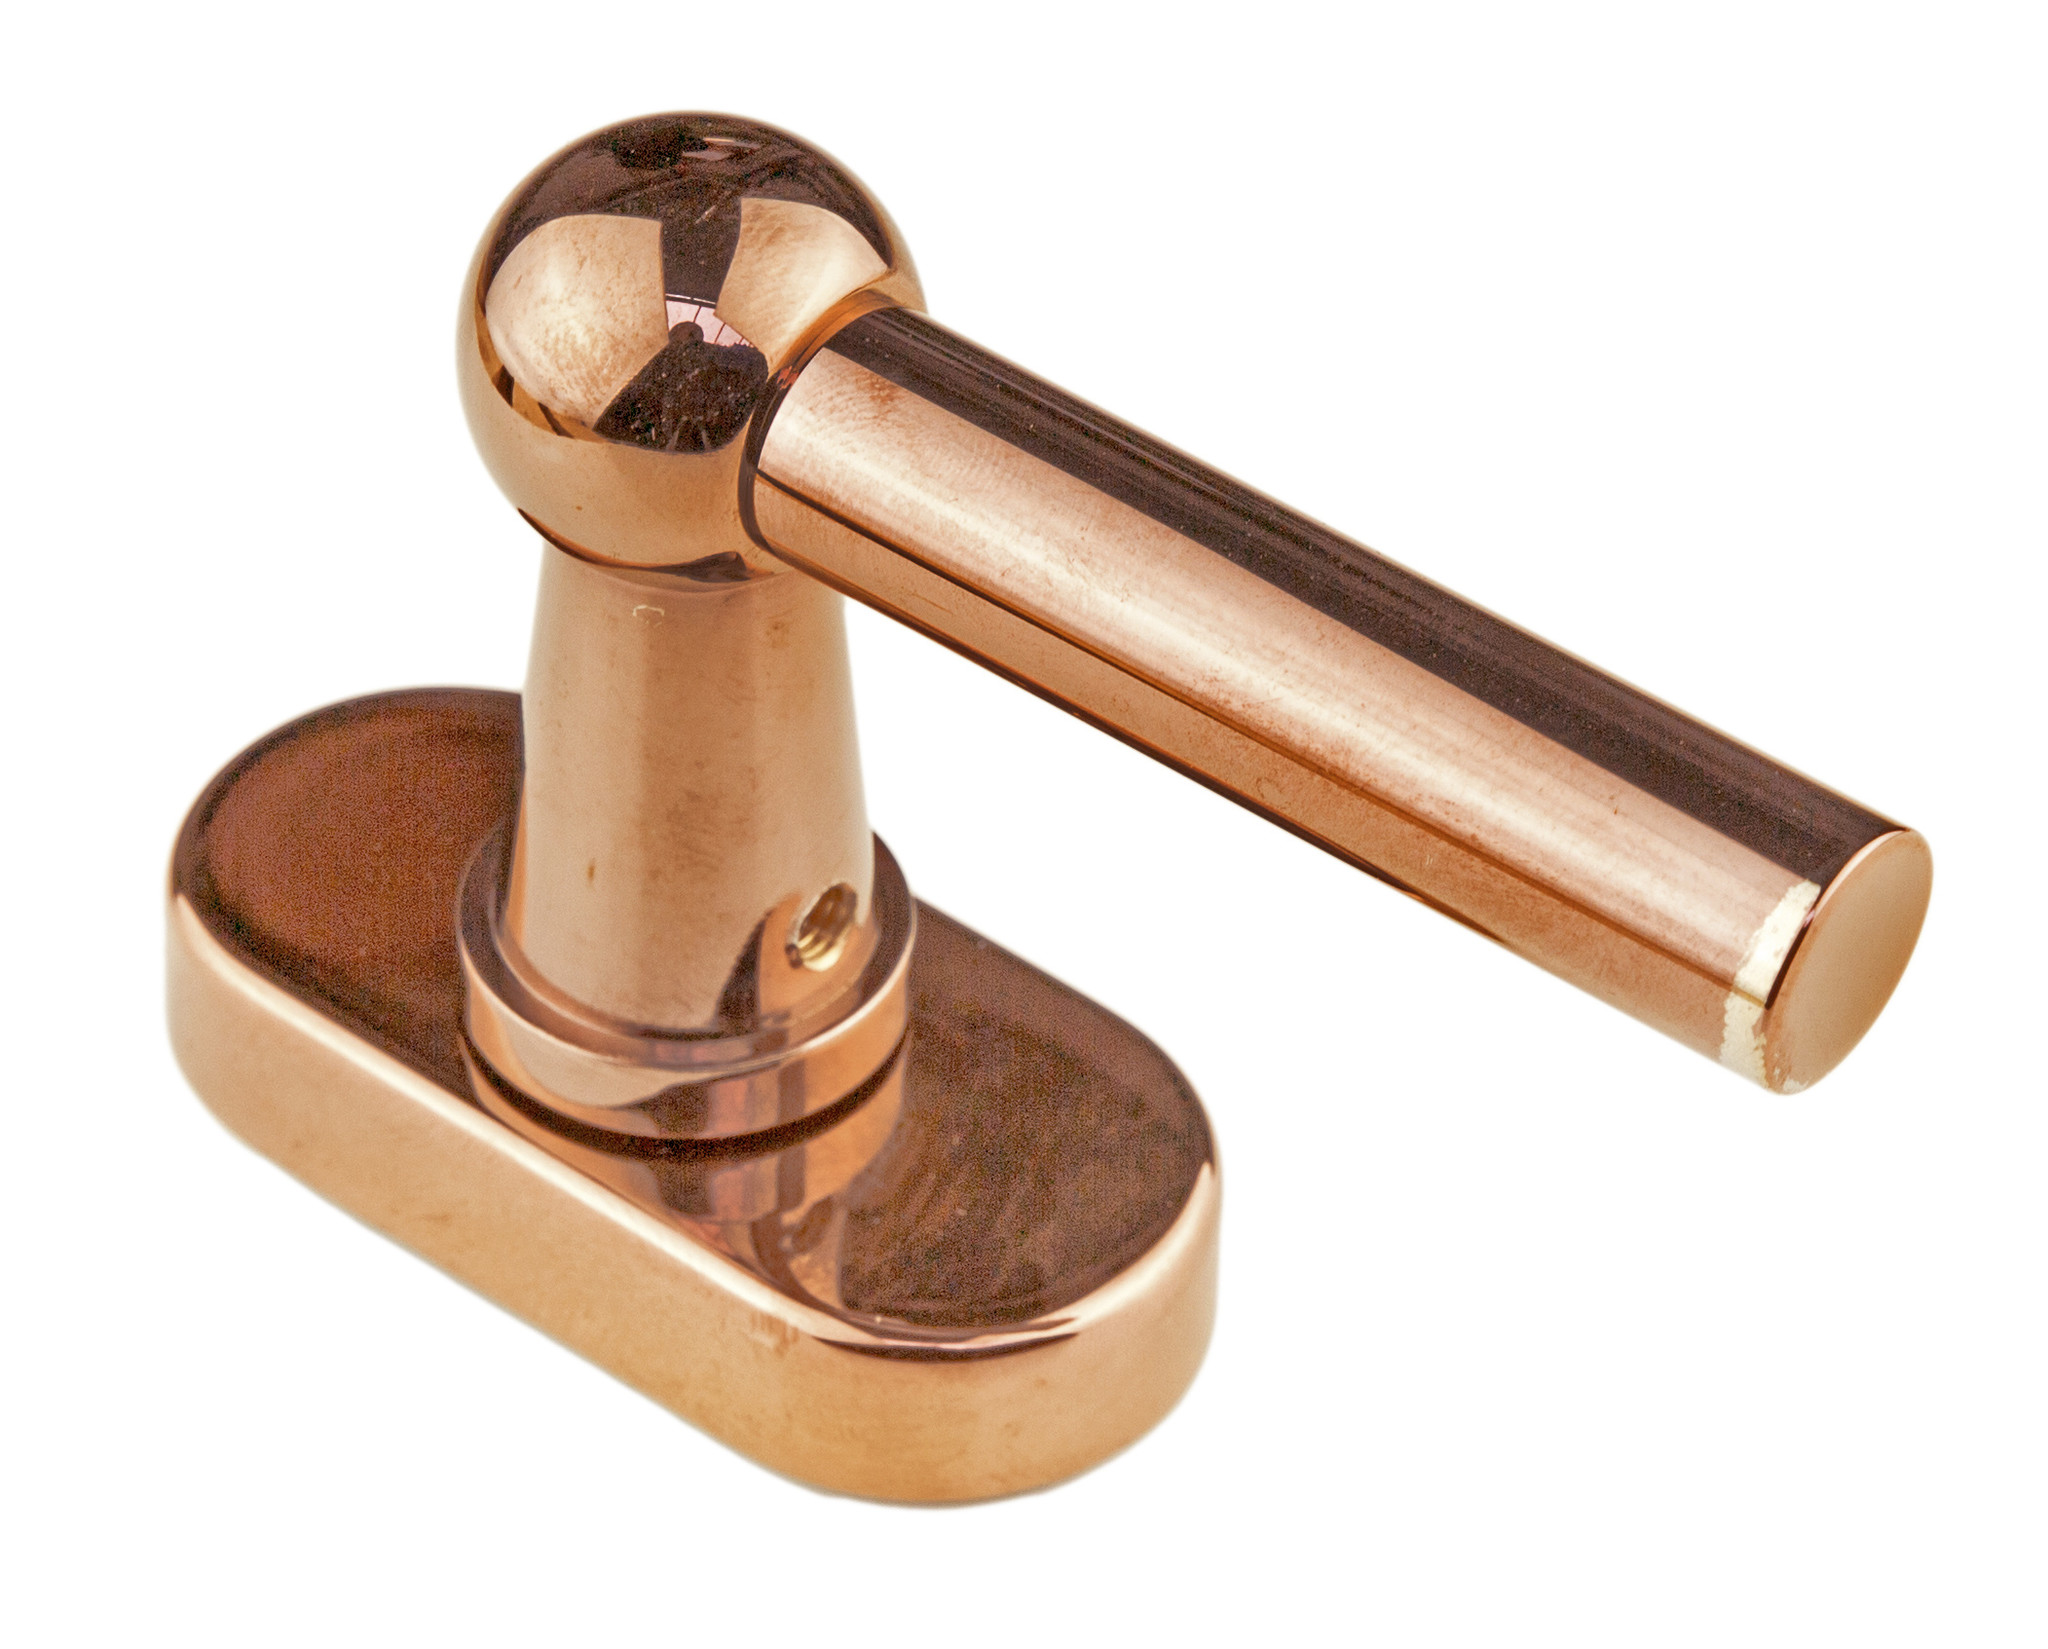 Rose-colored window handles